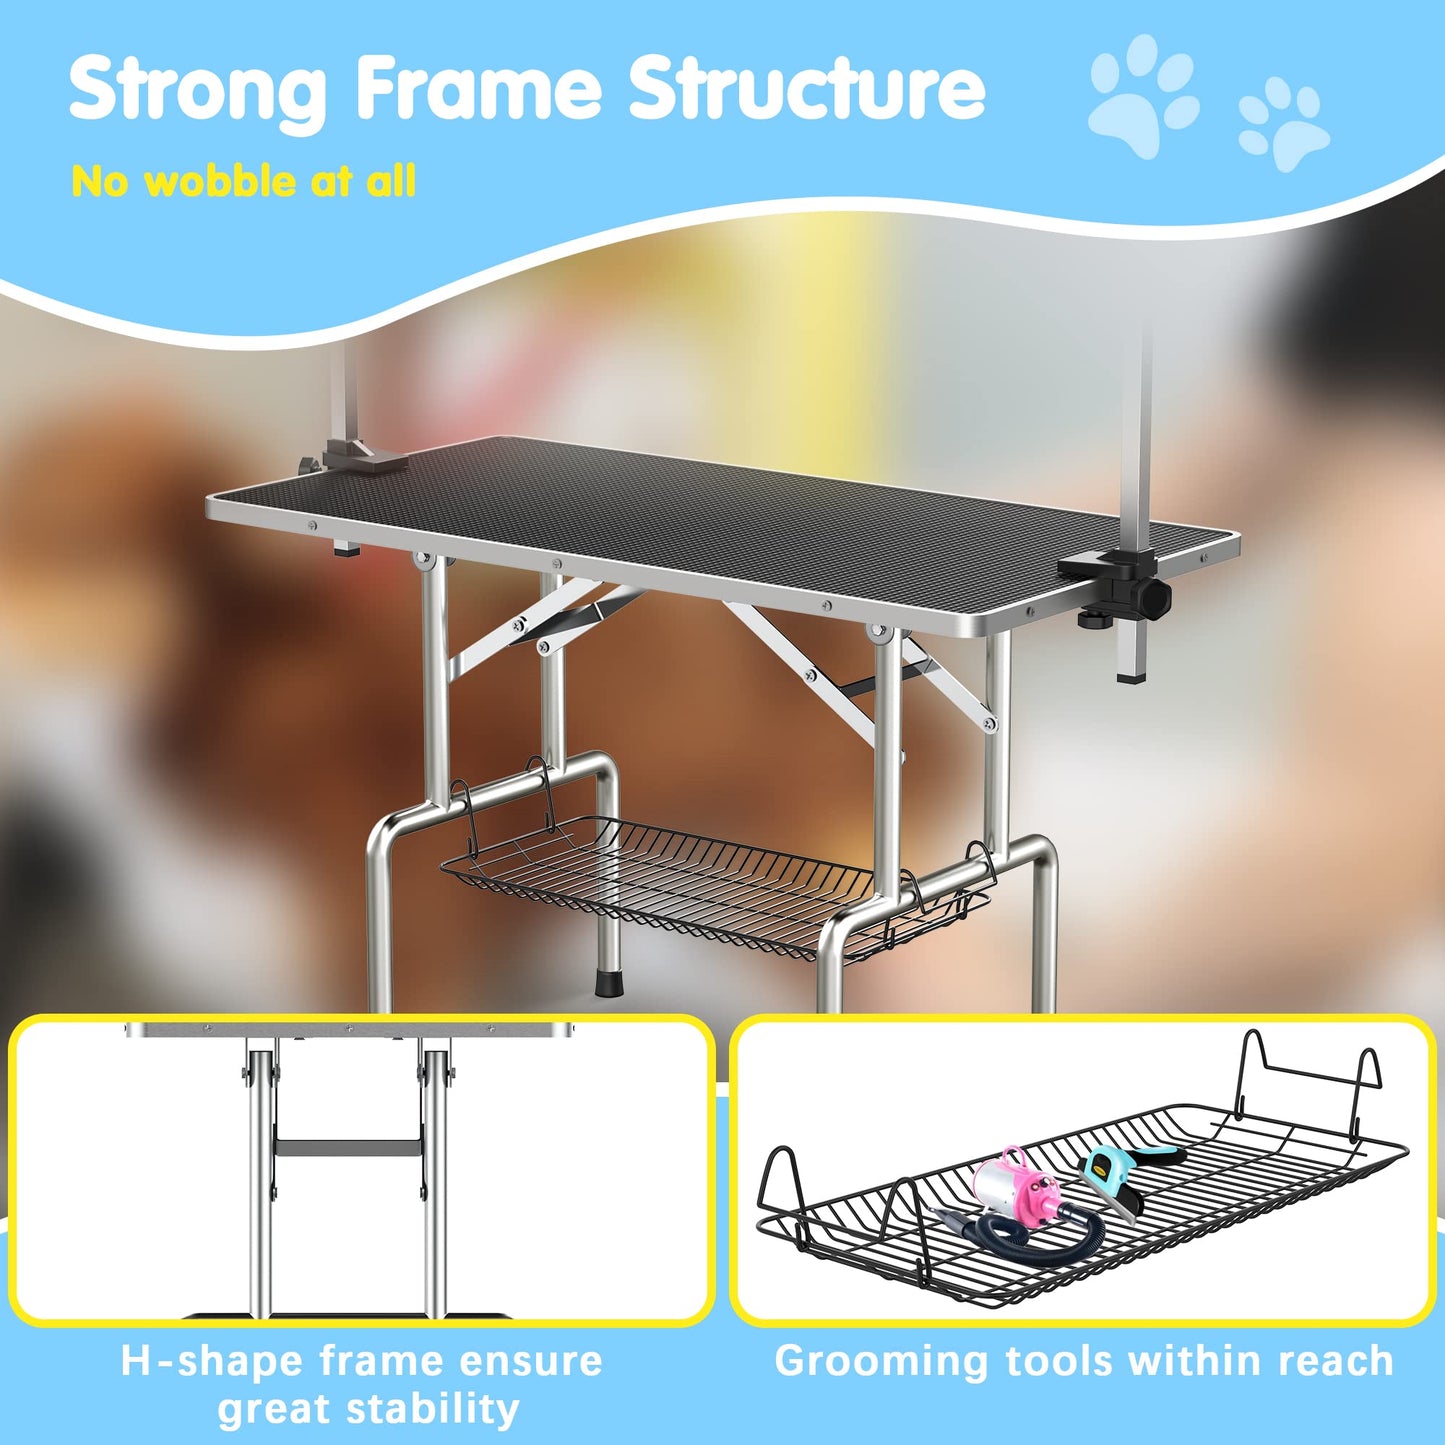 46'' Adjustable Pet Grooming Table Foldable Dog Grooming Station